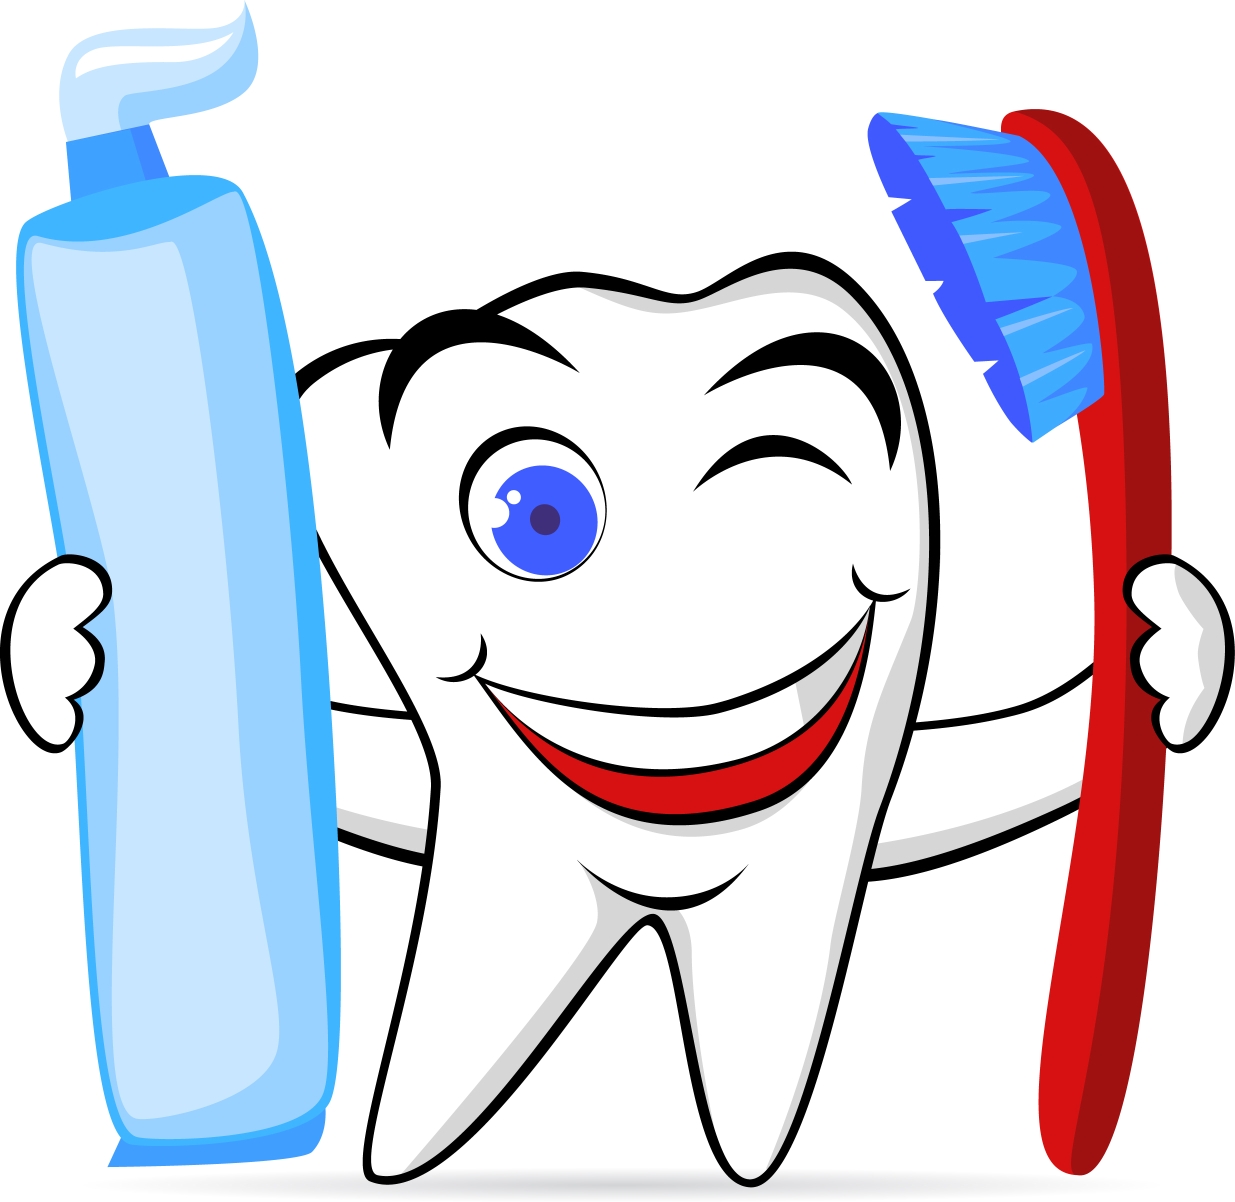 Tooth mouth with teeth clipart .